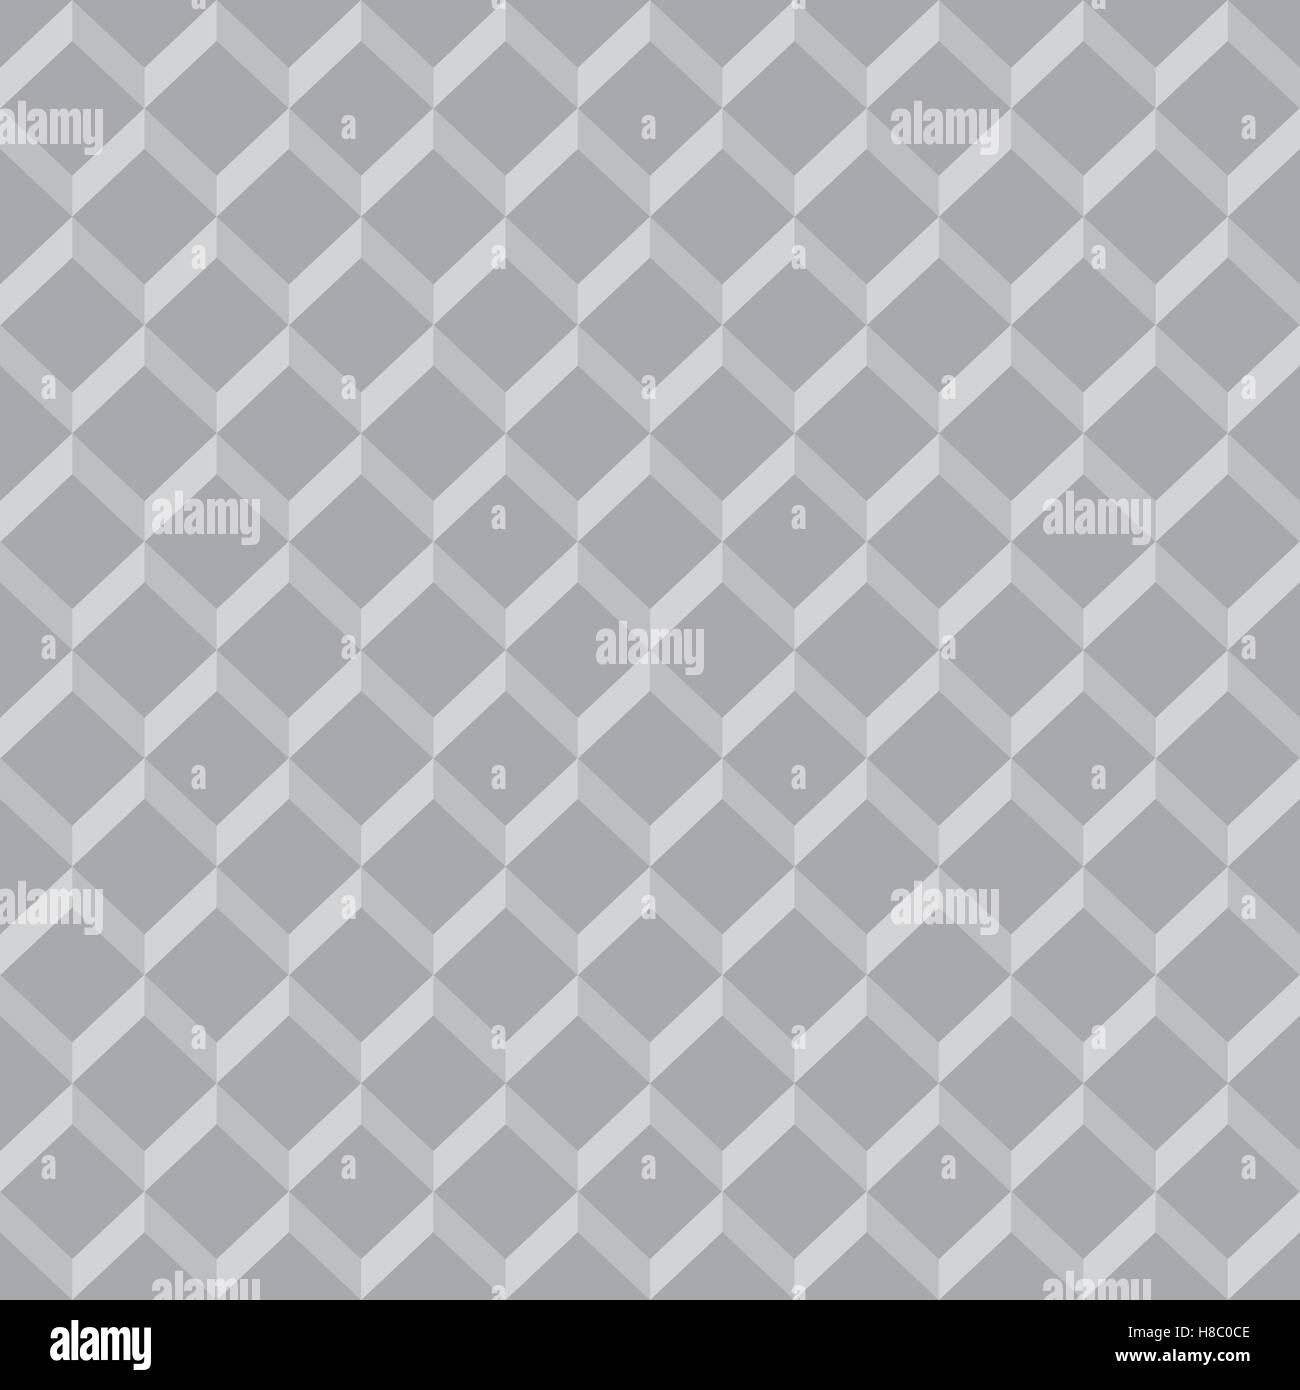 Geometric seamless pattern. Texture with bulky cubes Stock Vector